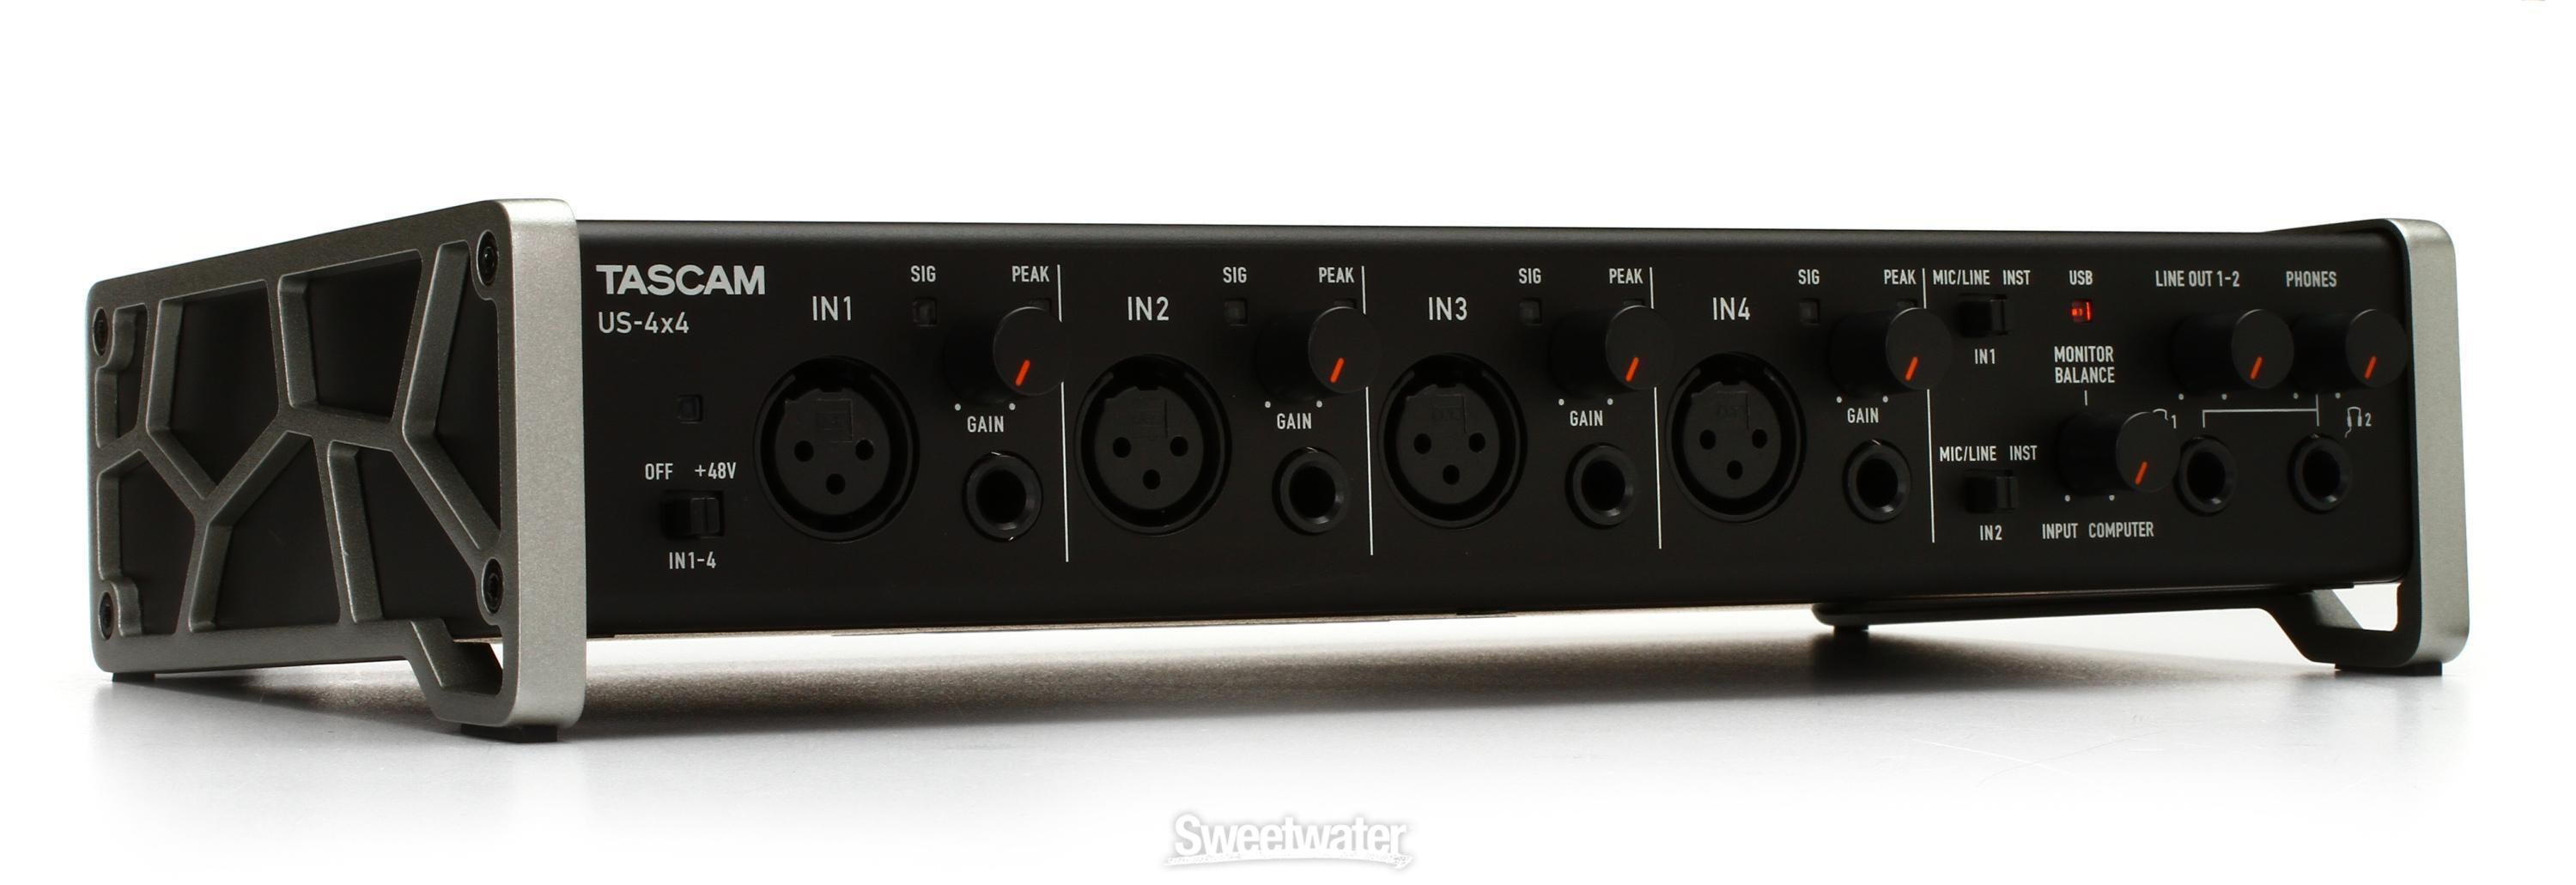 TASCAM US-4x4 USB Audio Interface Reviews | Sweetwater